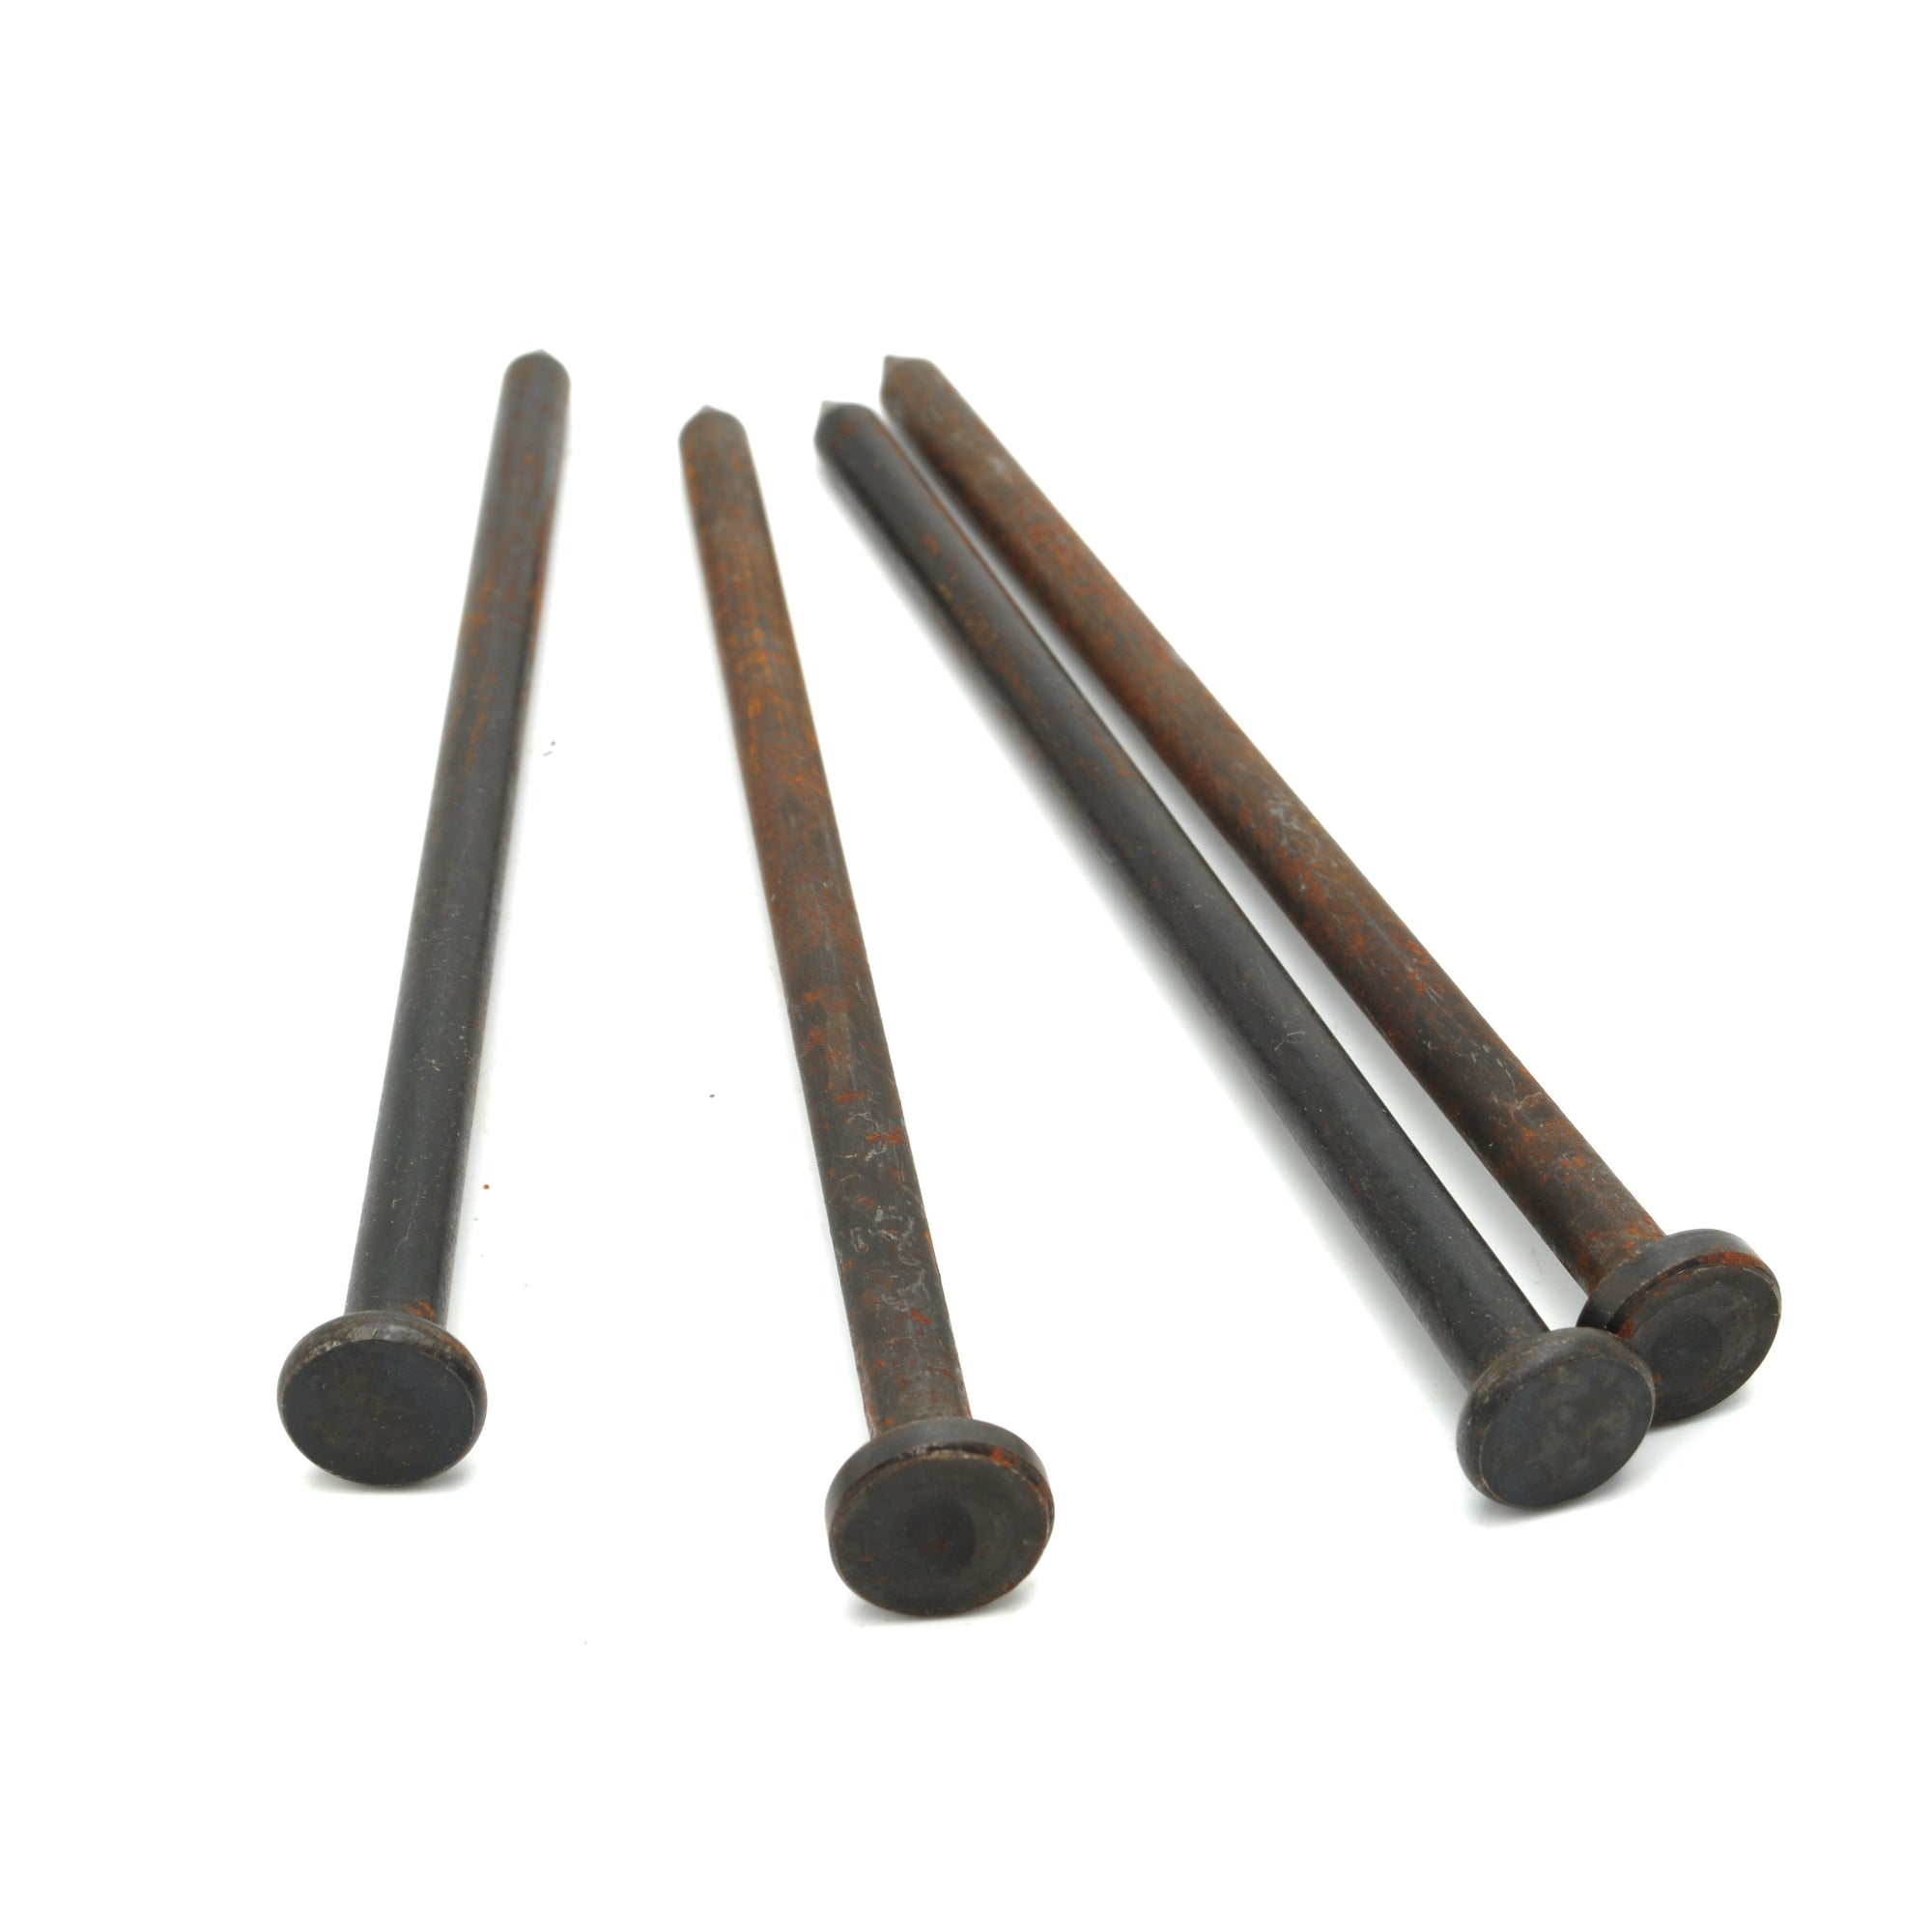 A 4 Pack of Holeshot Replacement Stakes